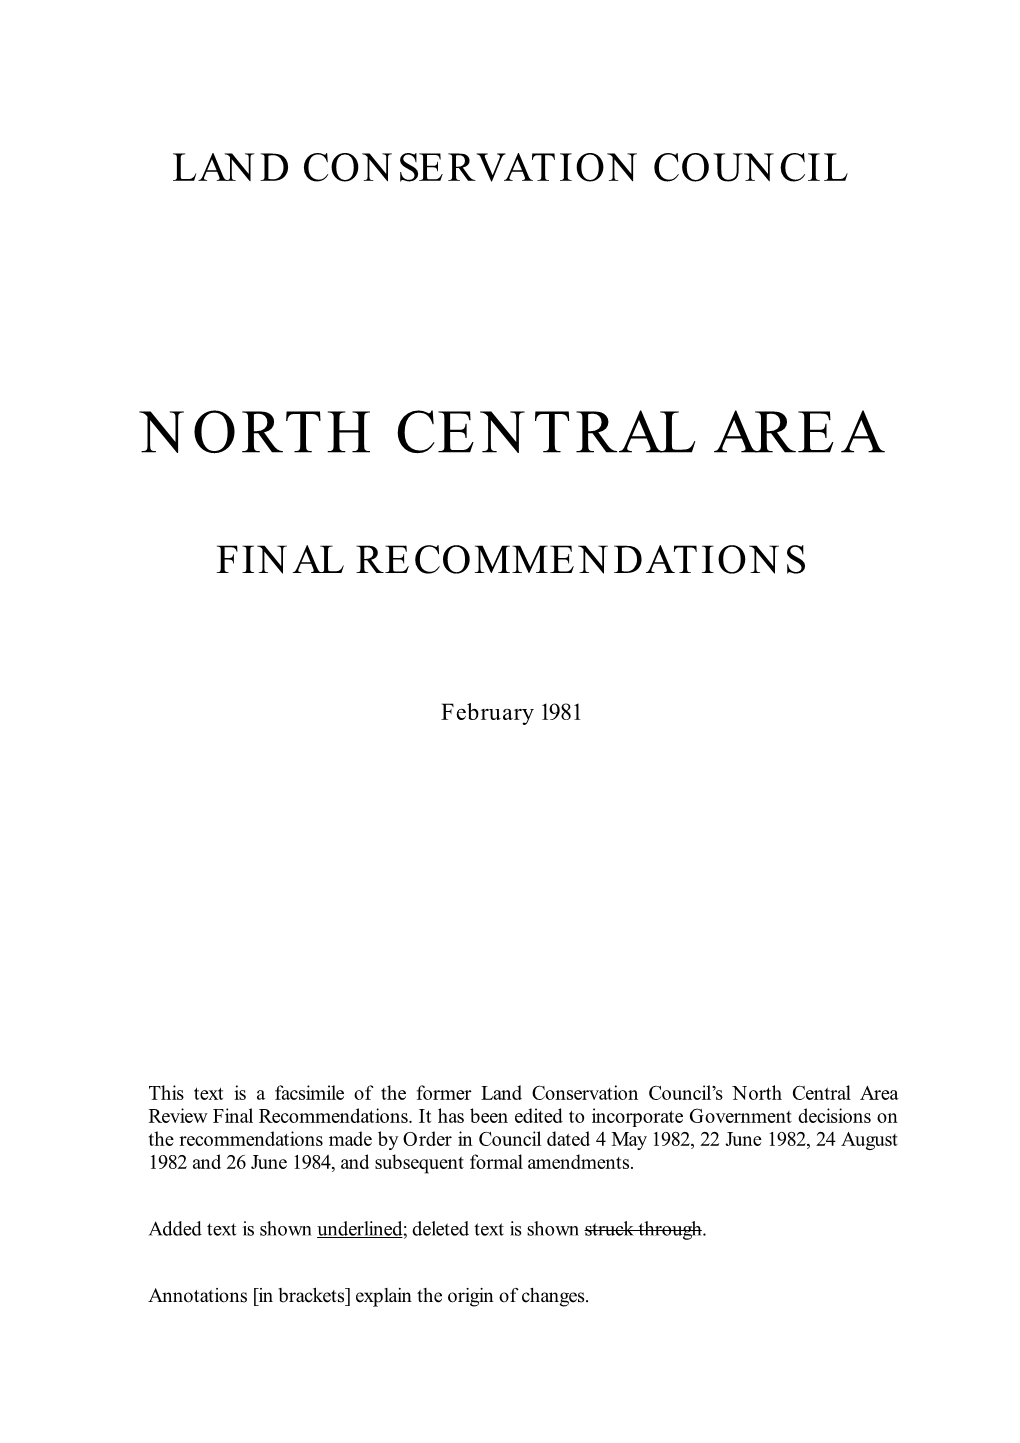 North Central Area Final Recommendations